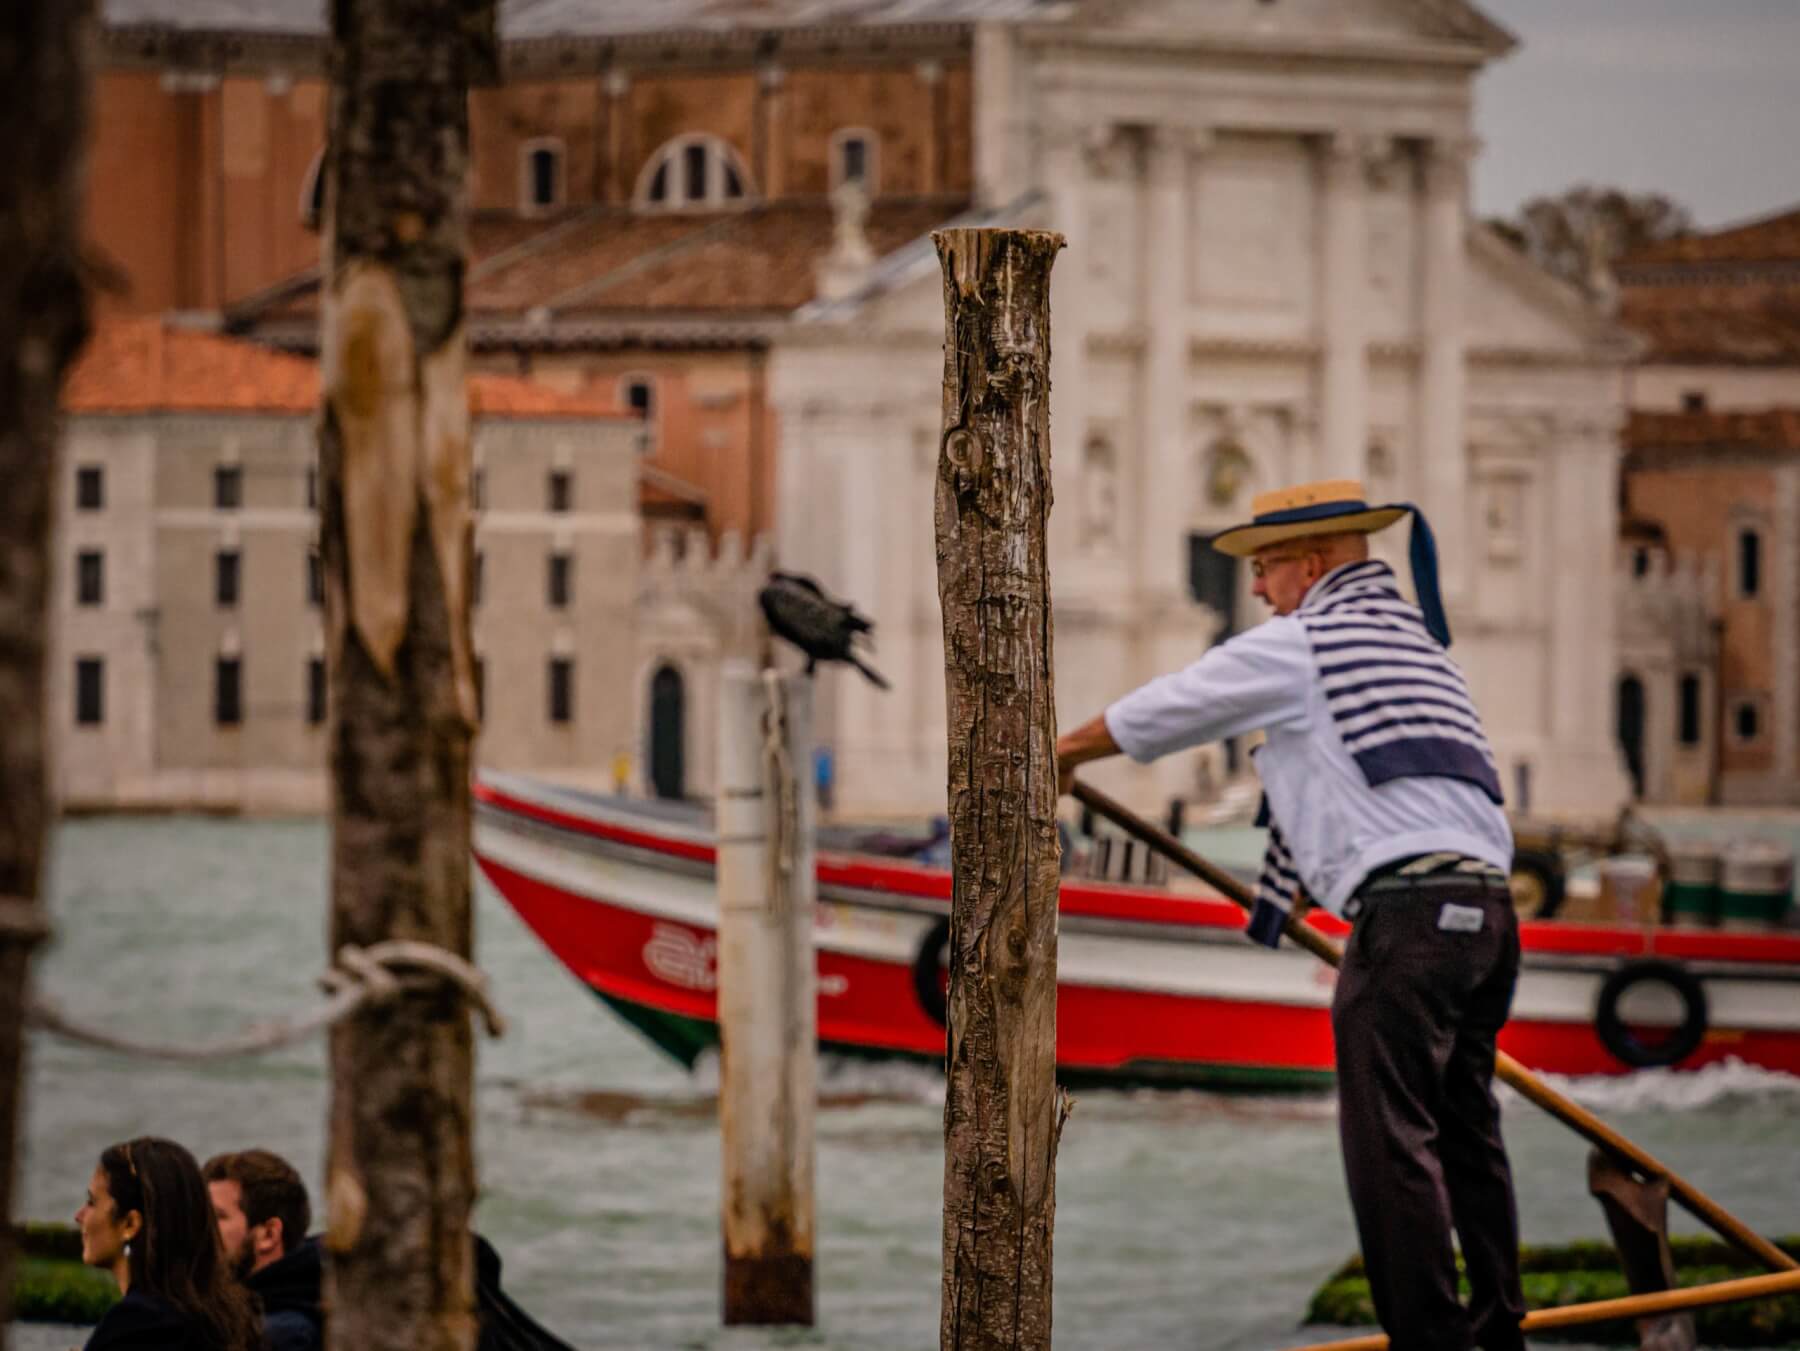 Gondola on the Grand Canal in Venice Italy